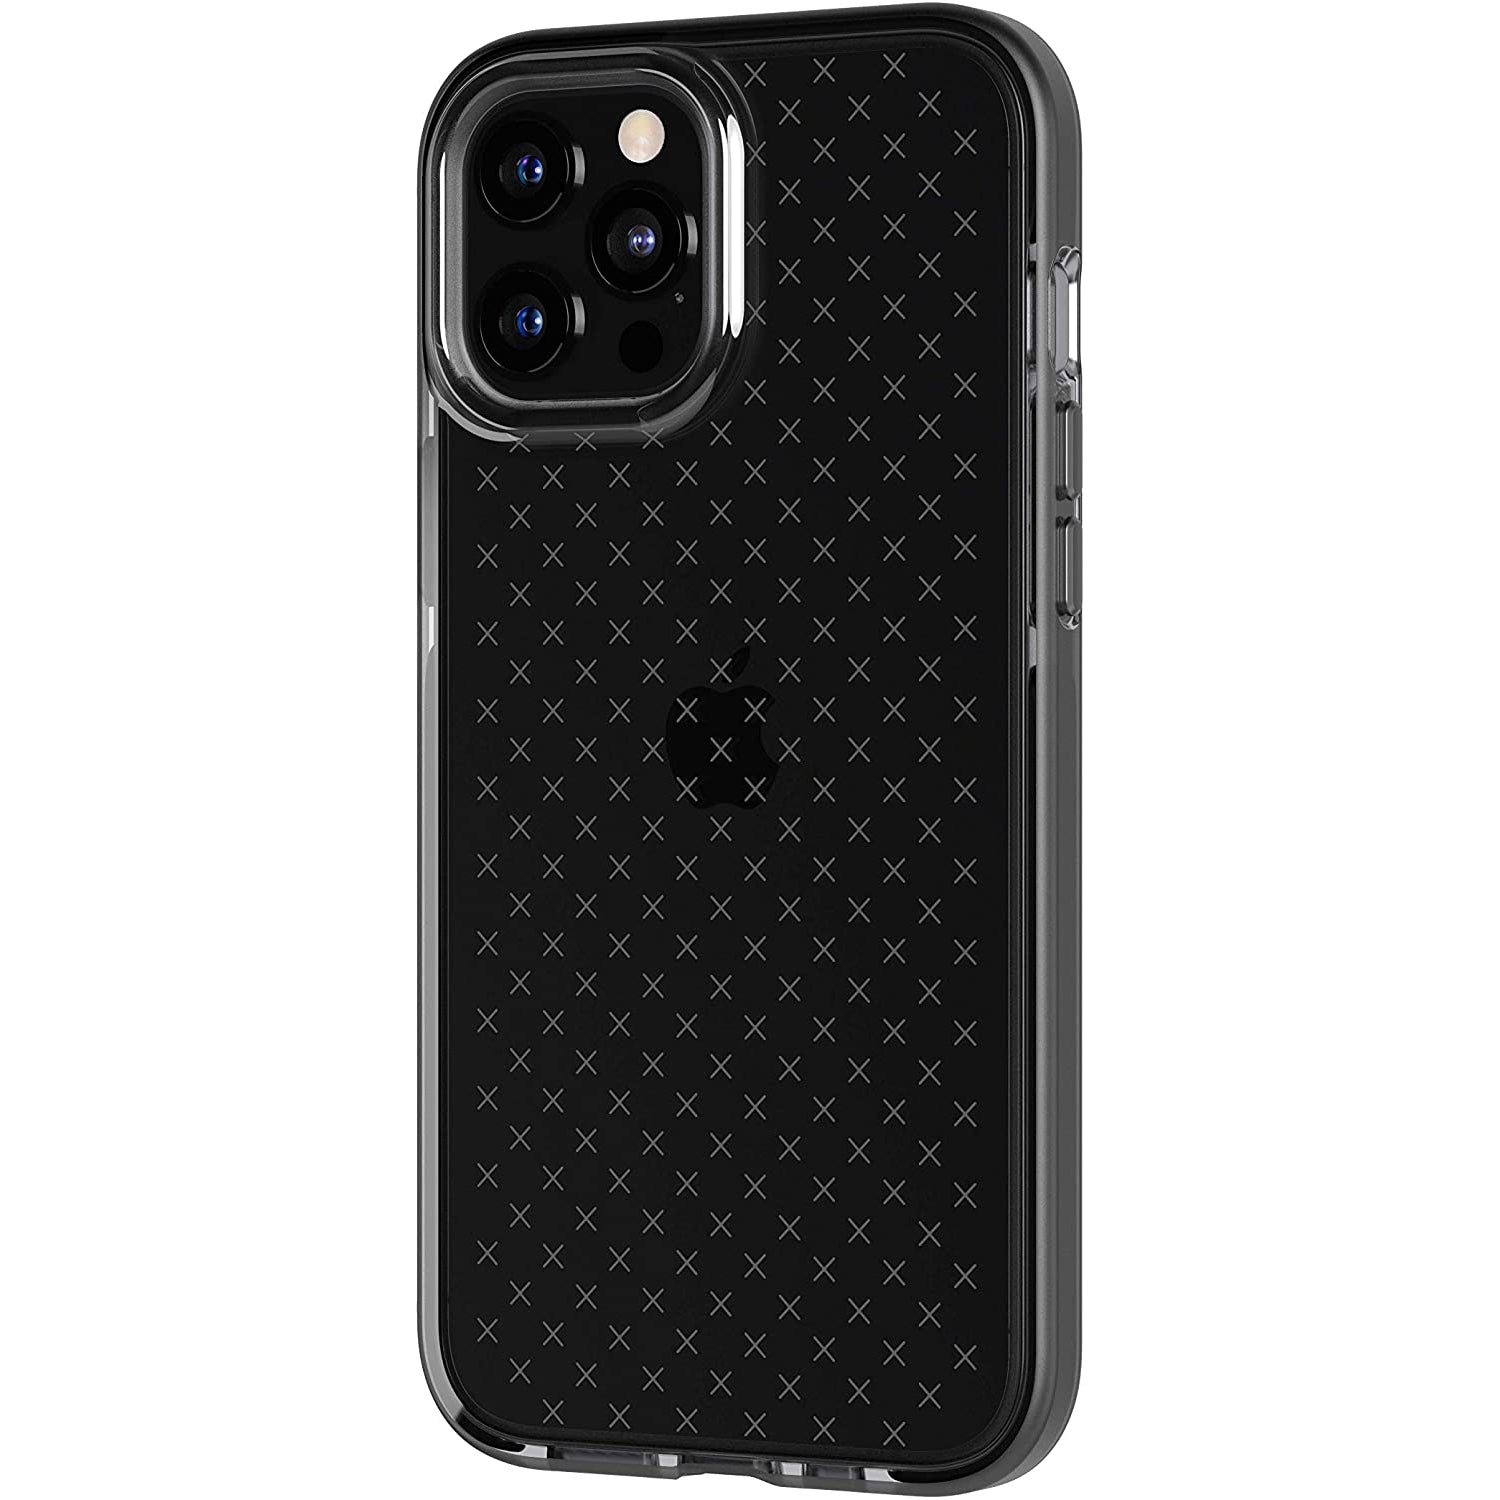 Tech21 Evo Check for Apple iPhone 12 Pro Max 5G - Germ Fighting Antimicrobial Phone Case with 12 ft. Drop Protection, Black